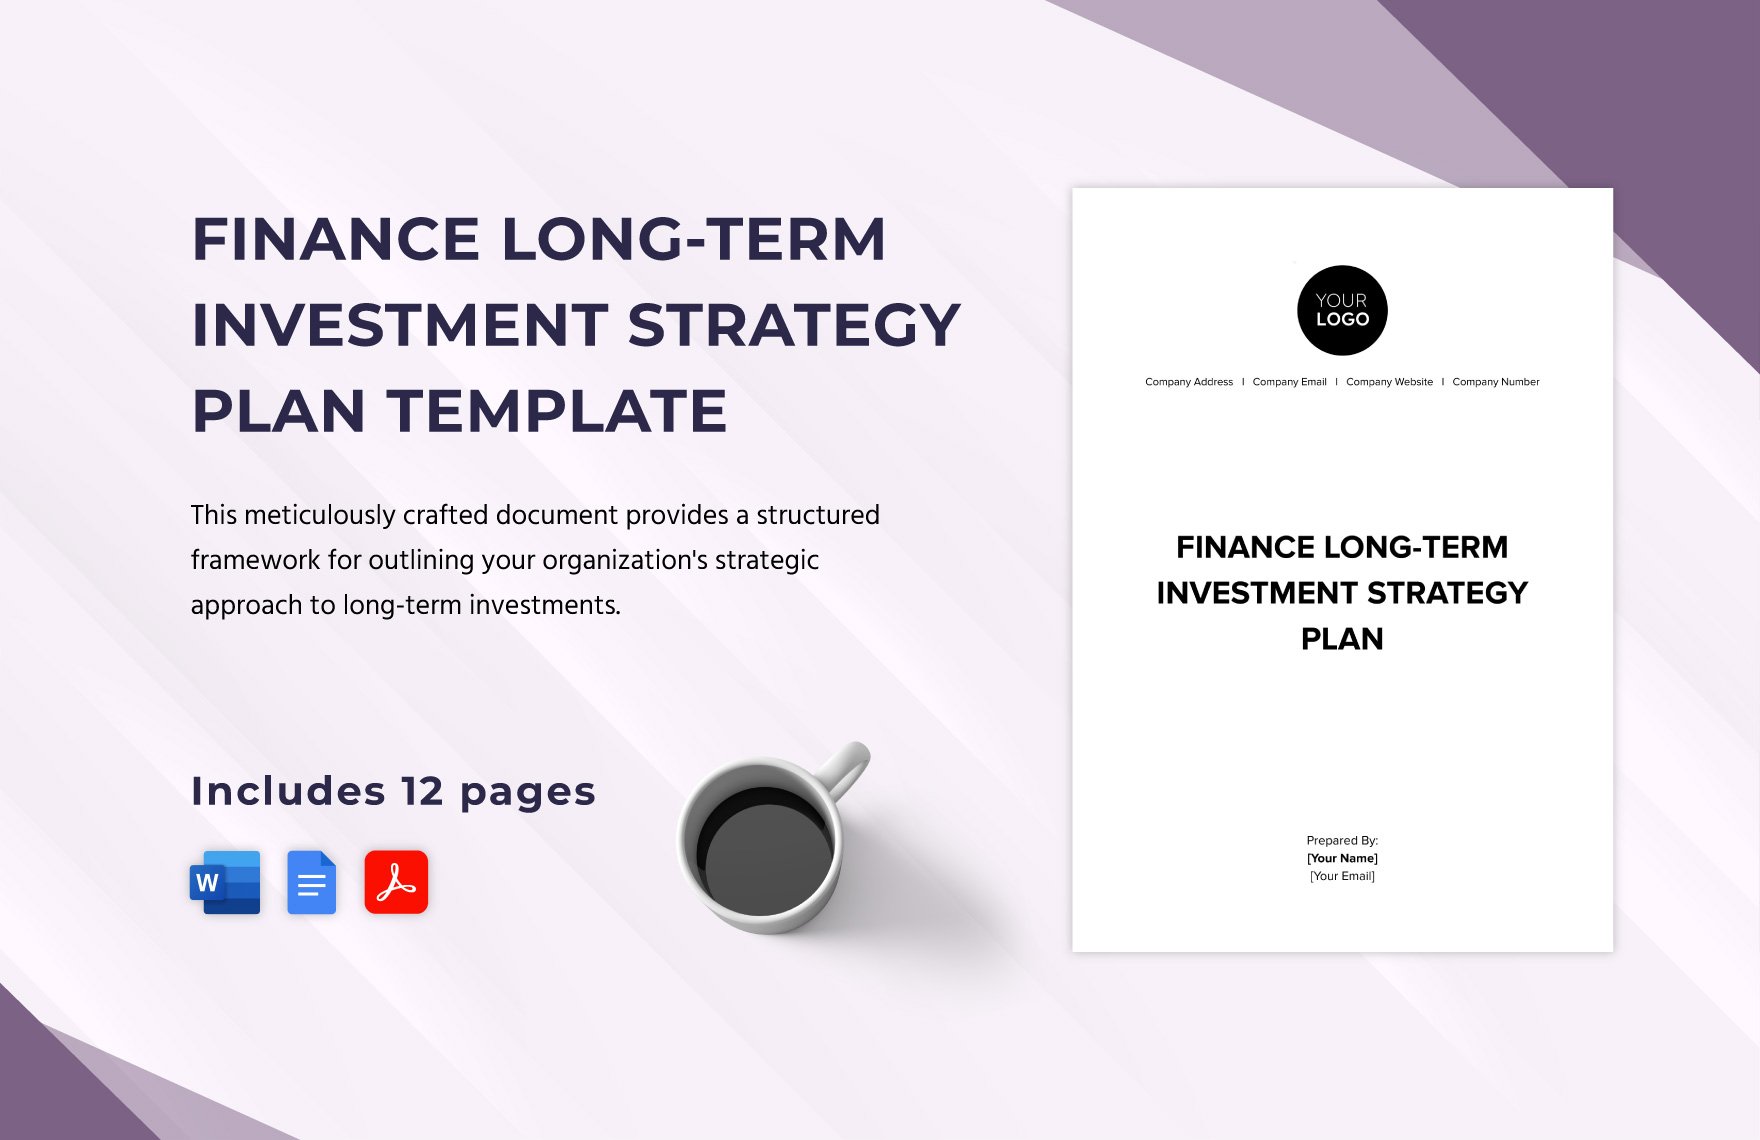 Finance Long-Term Investment Strategy Plan Template